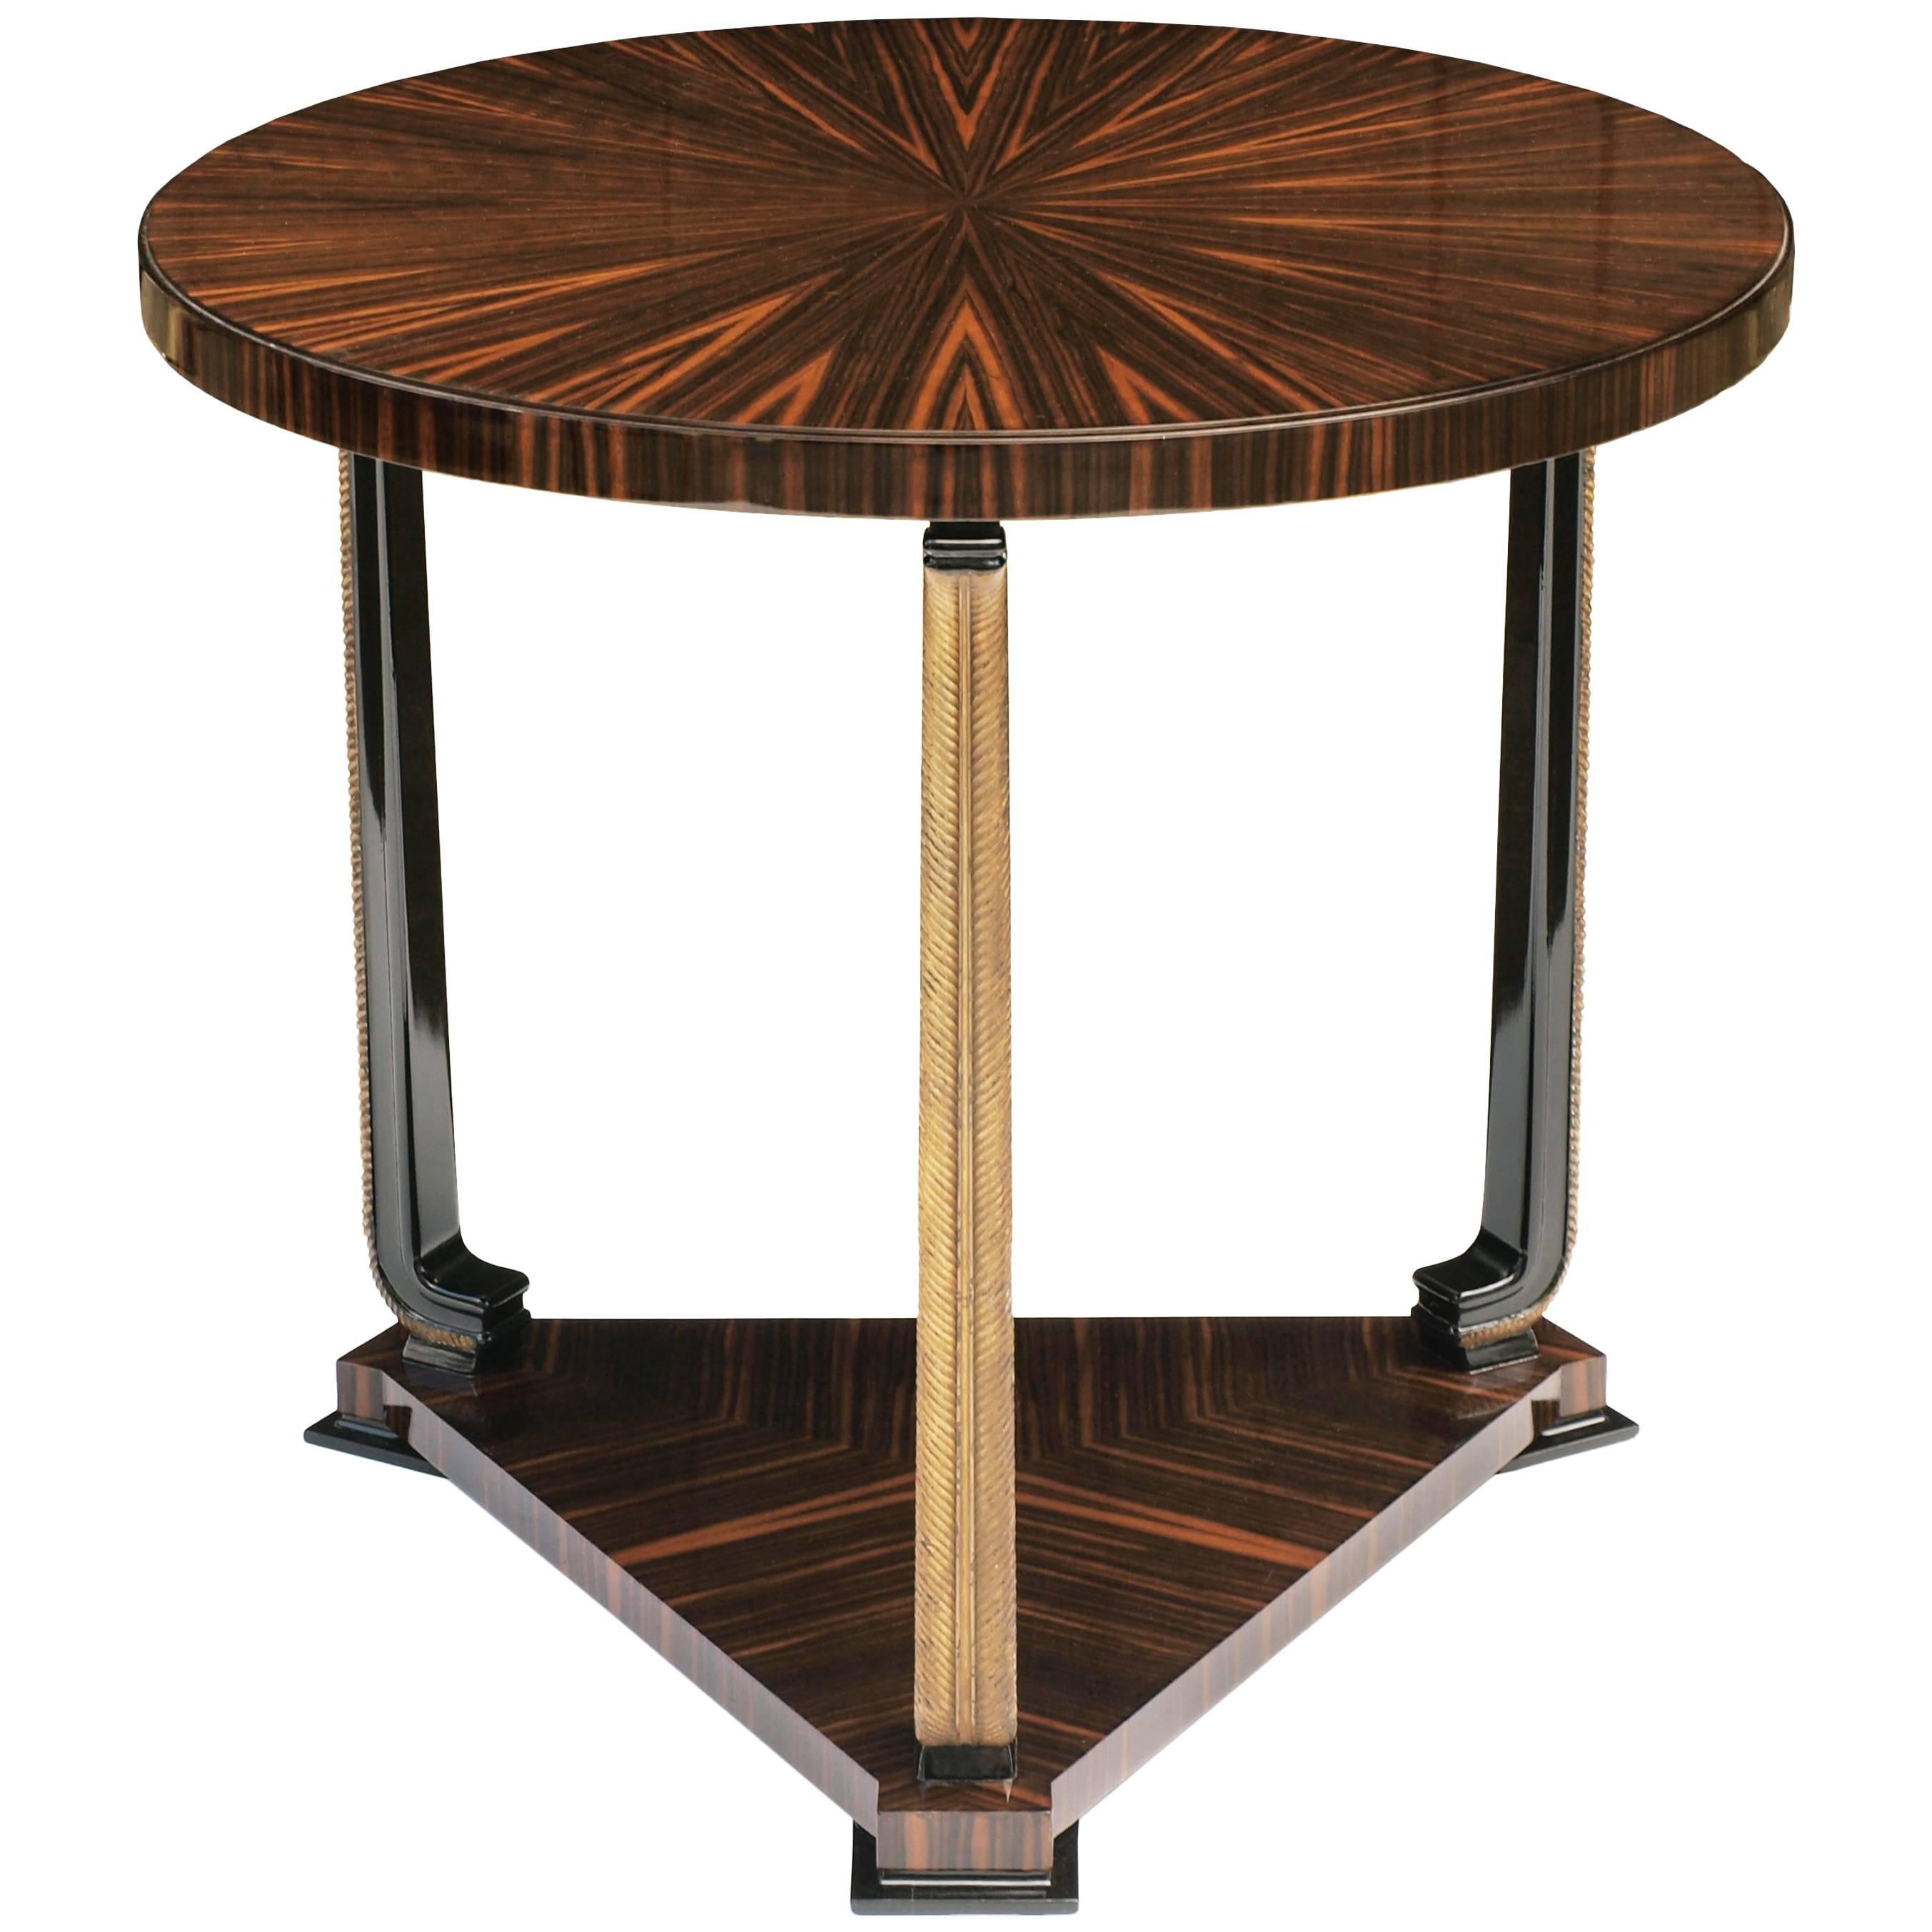 An exceptional ebony Macassar and parcel-gilt circular table by Axel Einar Hjorth for Nordiska Kompaniet, circa 1928.

The sunburst top is of matched ebony Macassar with a stepped fashion edge, supported by three carved parcel-gilt palm shaped